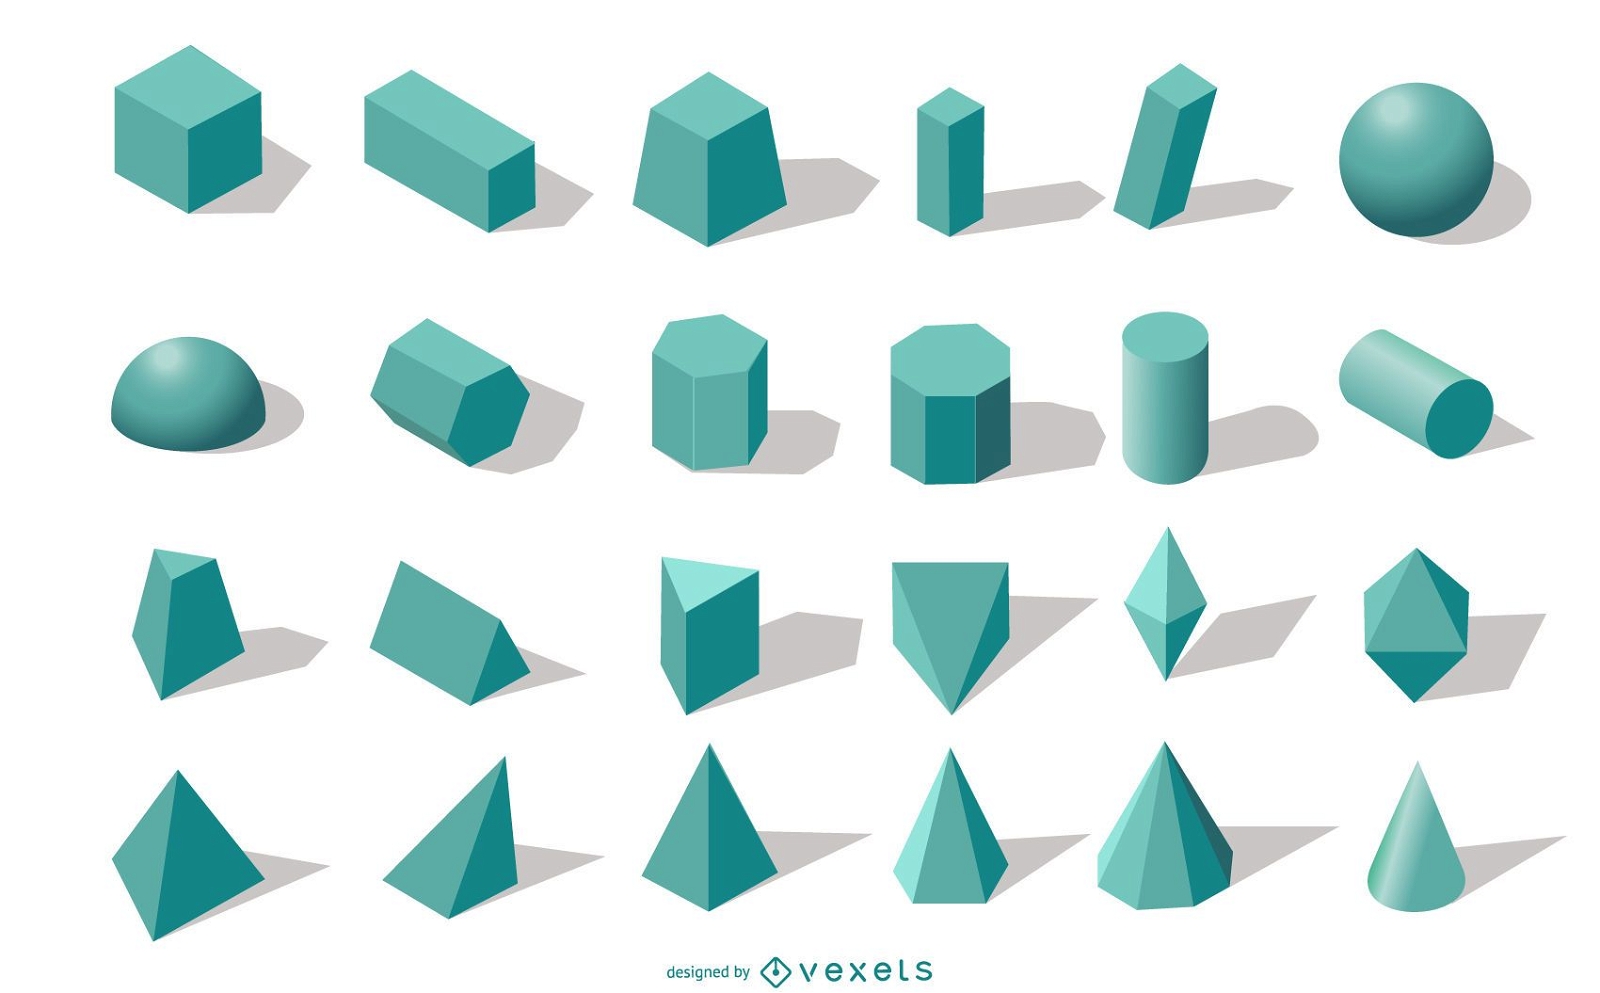 3D geometric shapes collection